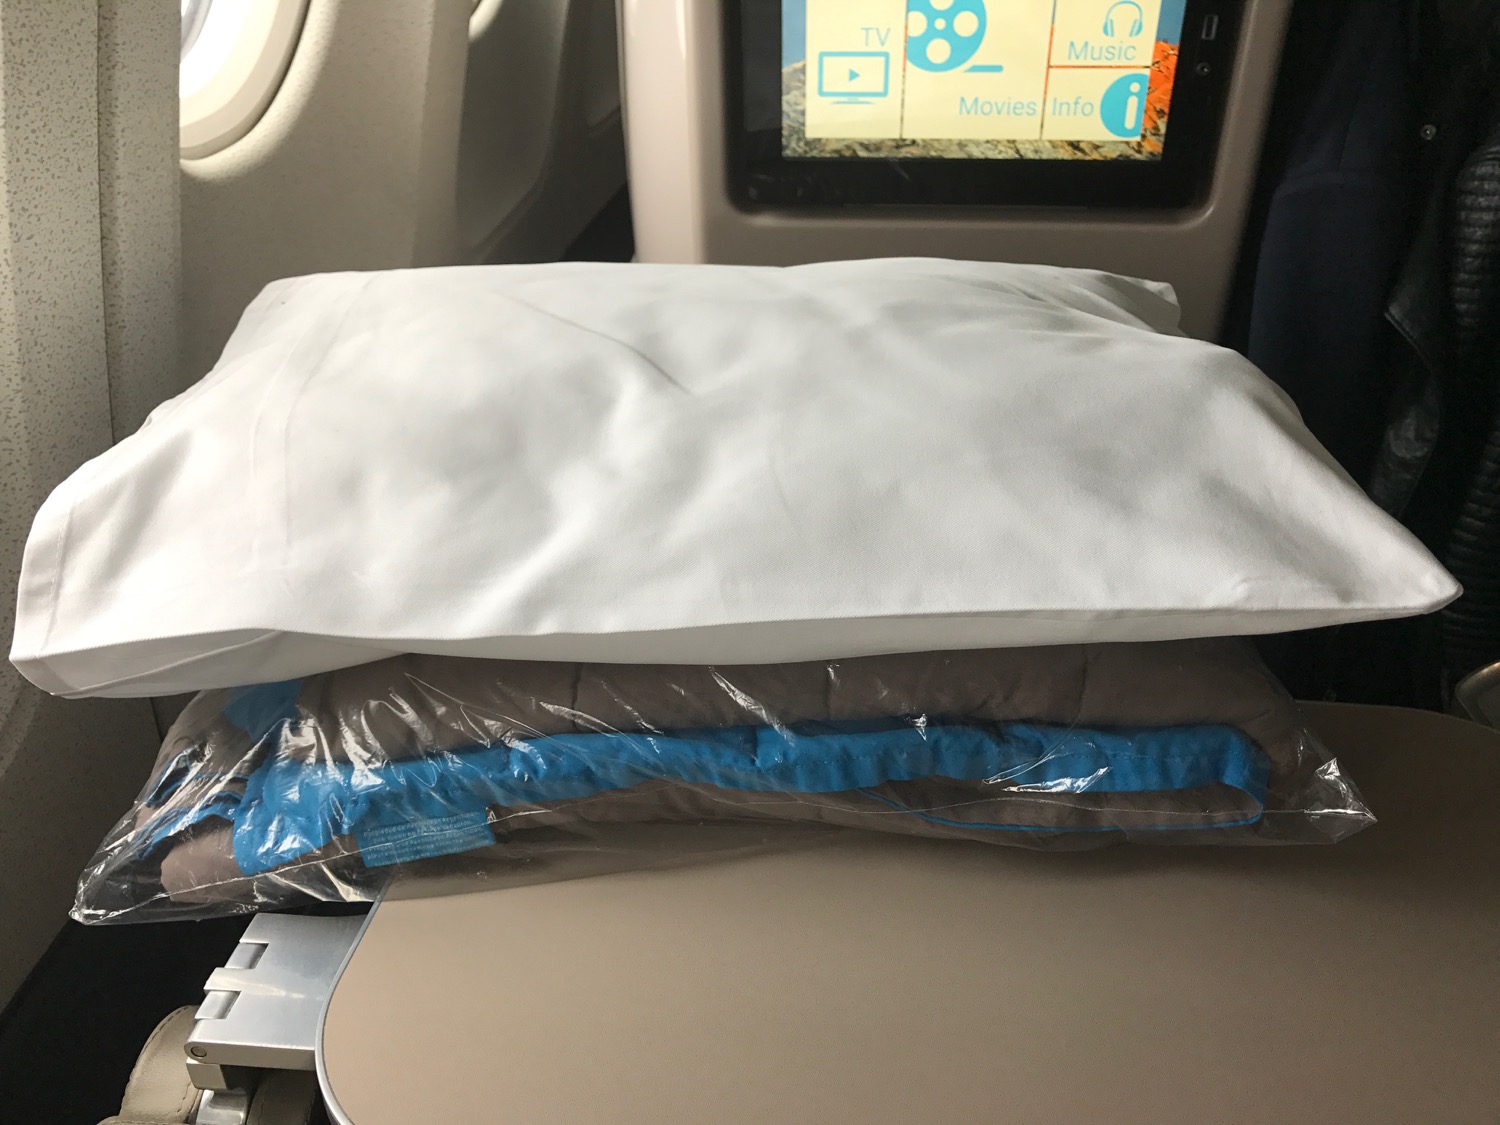 a white pillow and blue blanket in a plastic bag on a table